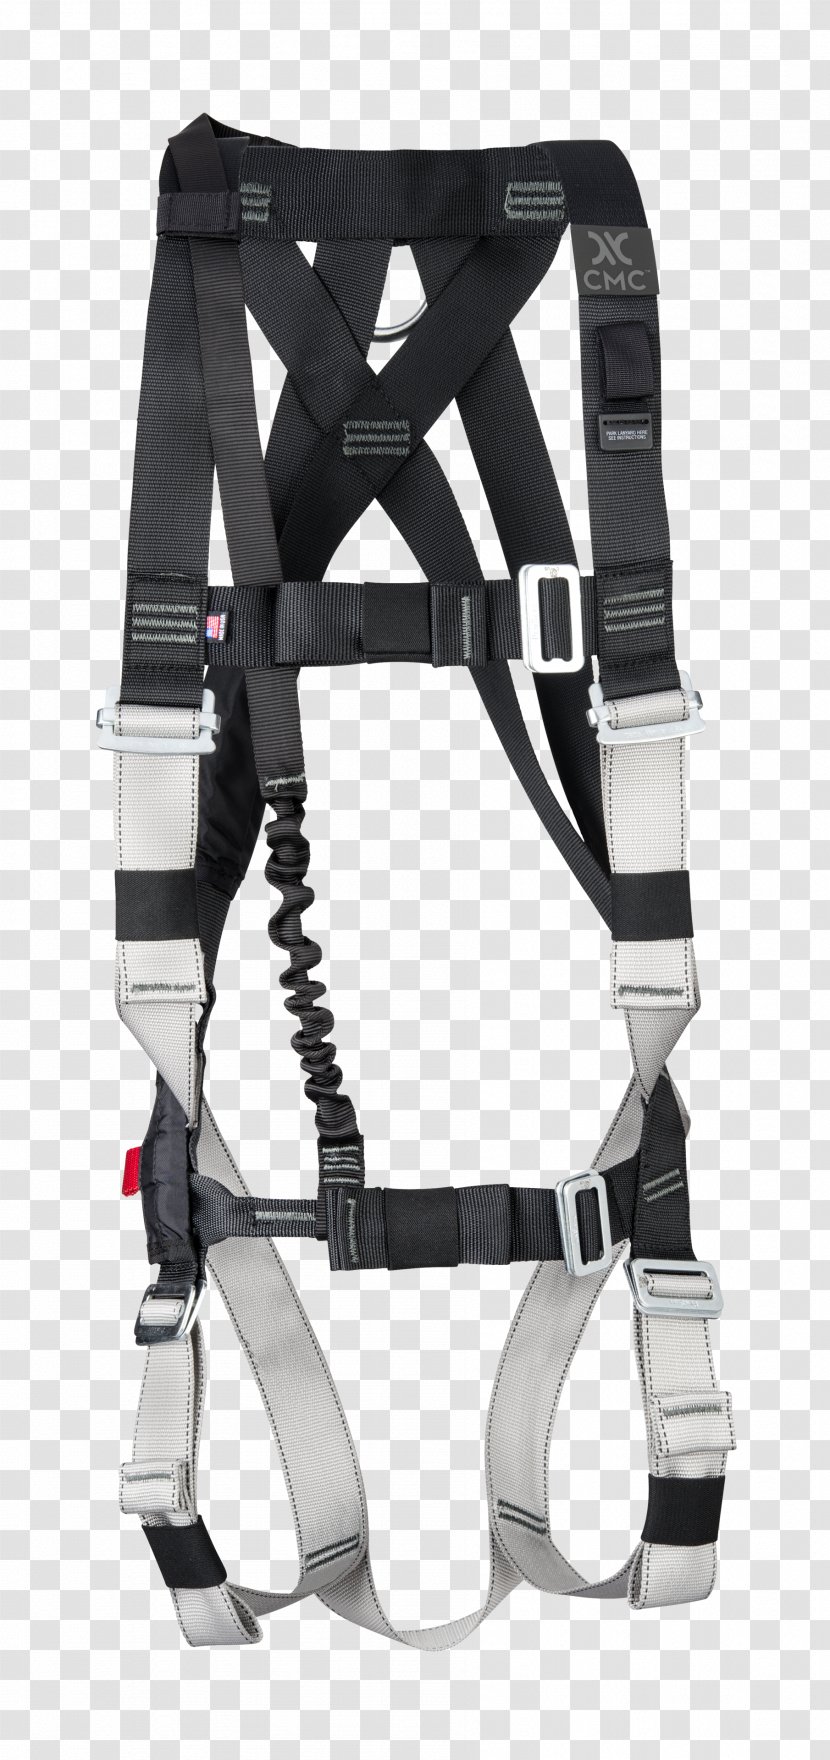 Climbing Harnesses Rope Rescue Suspension Trauma - Lacrosse Protective Gear Transparent PNG